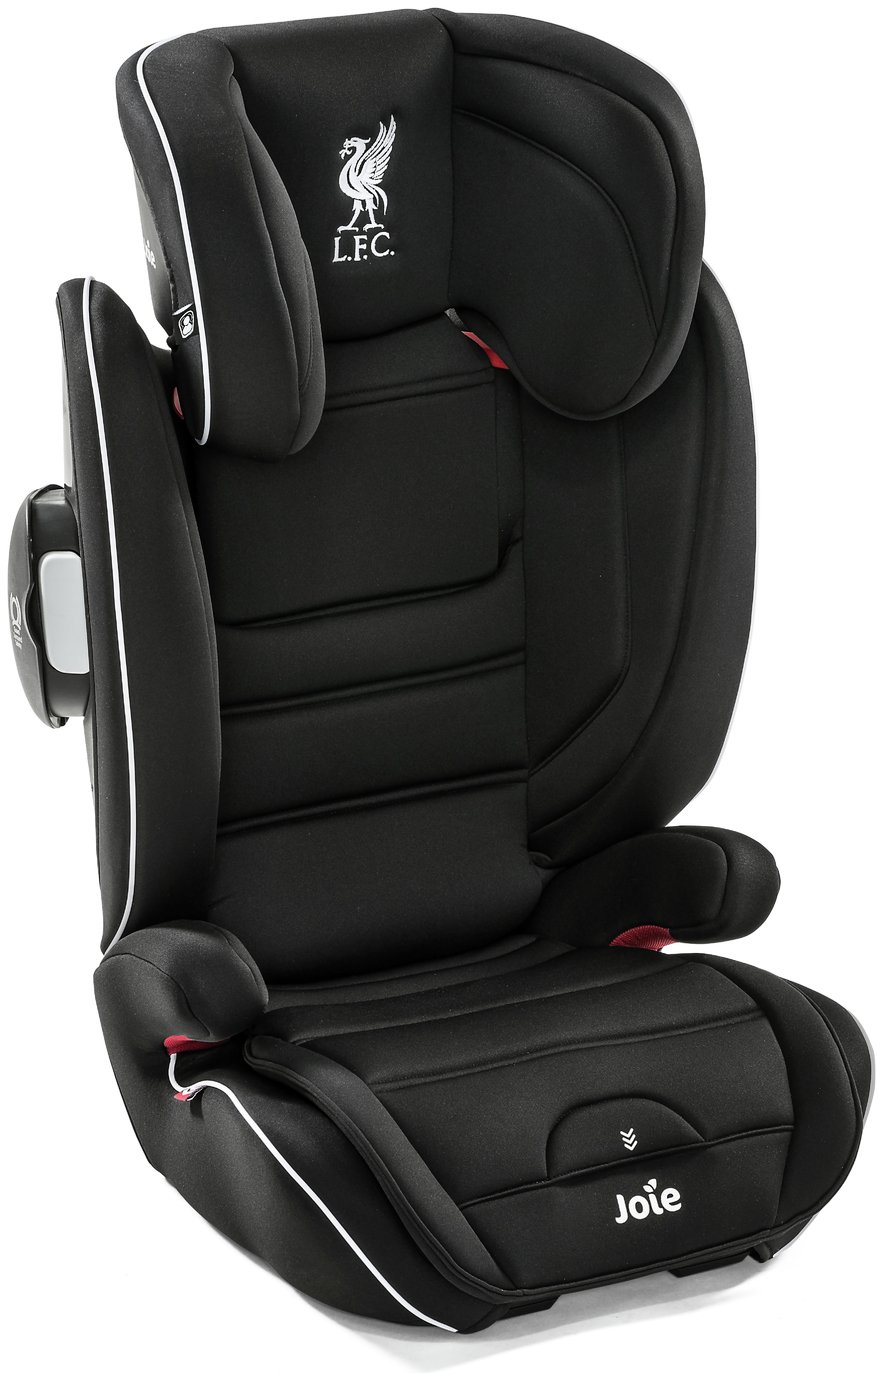 Joie Duallo LFC Groups 2-3 Car Seat review